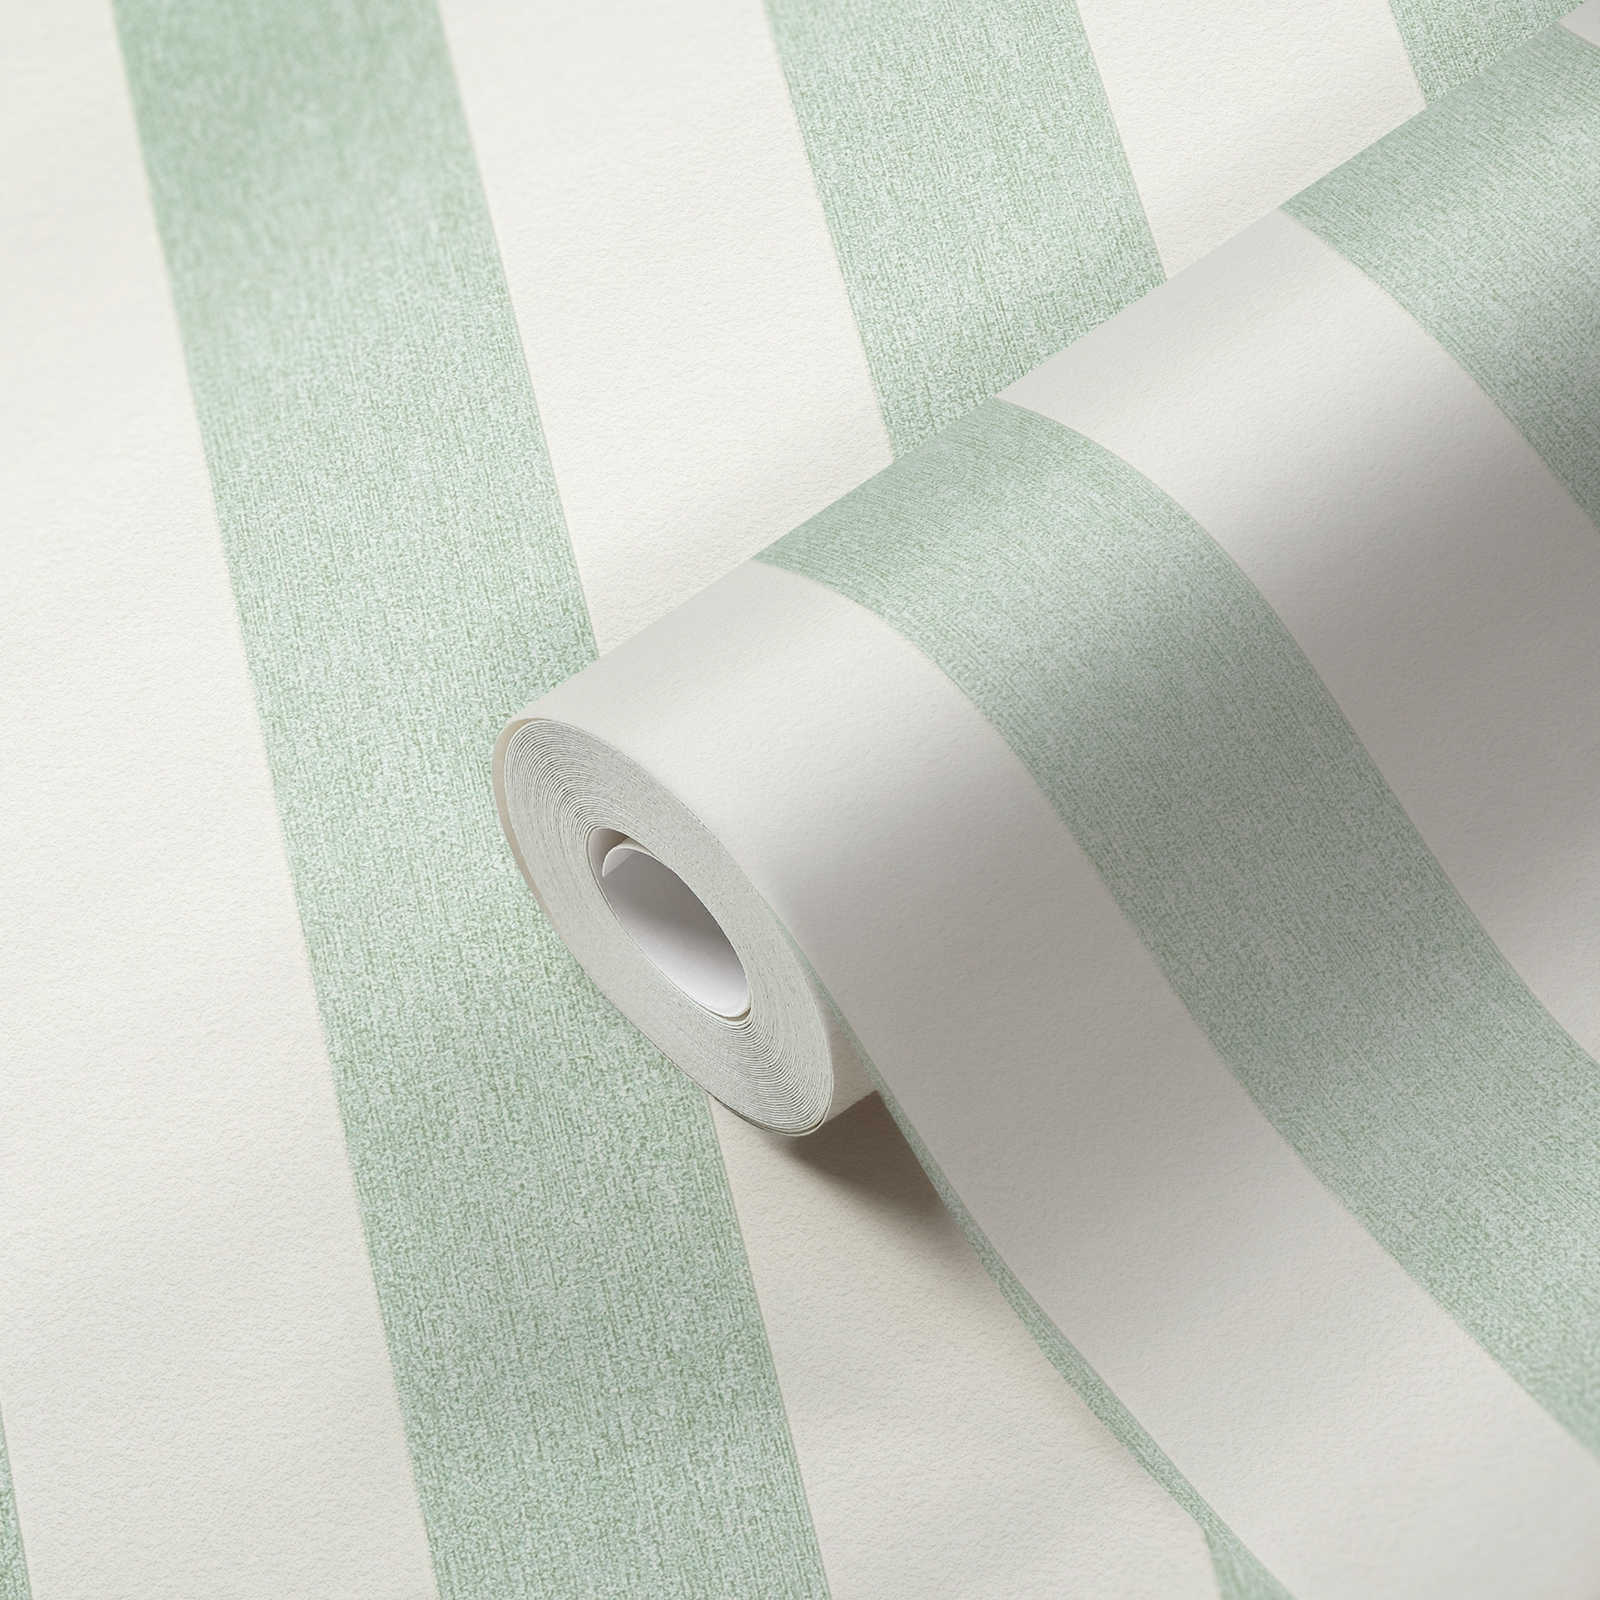             Non-woven wallpaper with stripes in textured look & matt - green, white
        